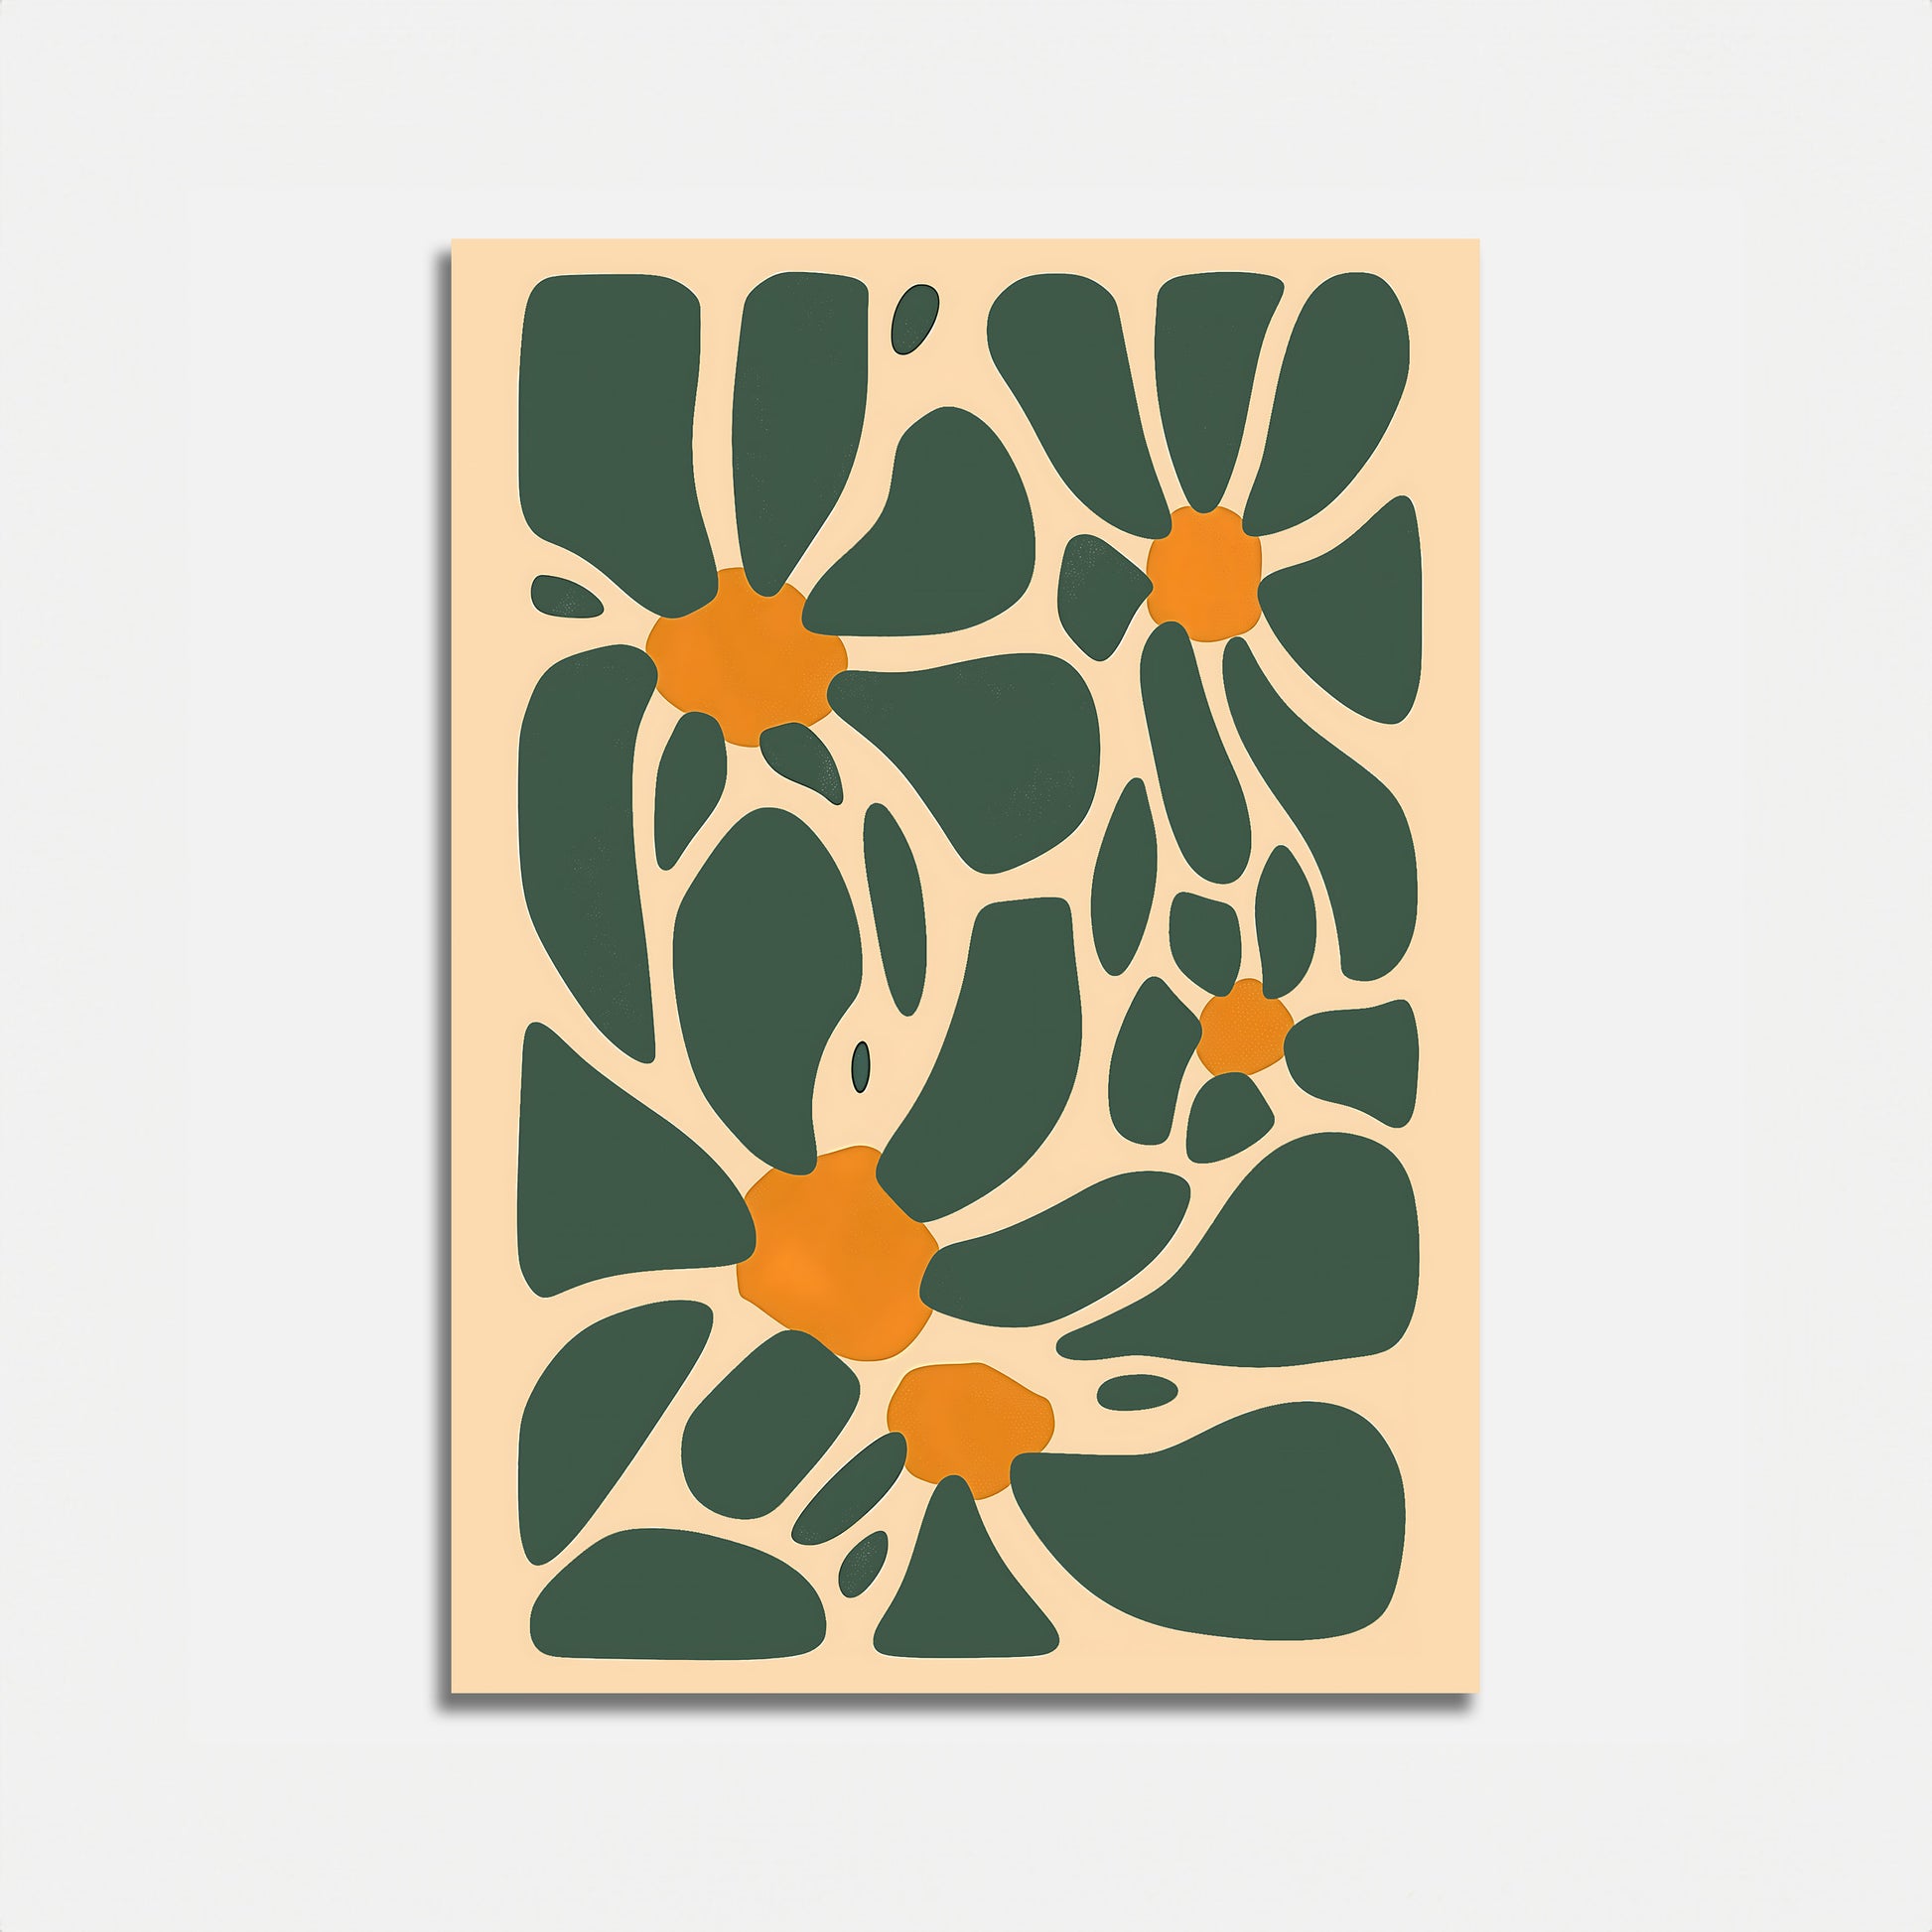 Abstract floral art with green and orange shapes on a cream background.